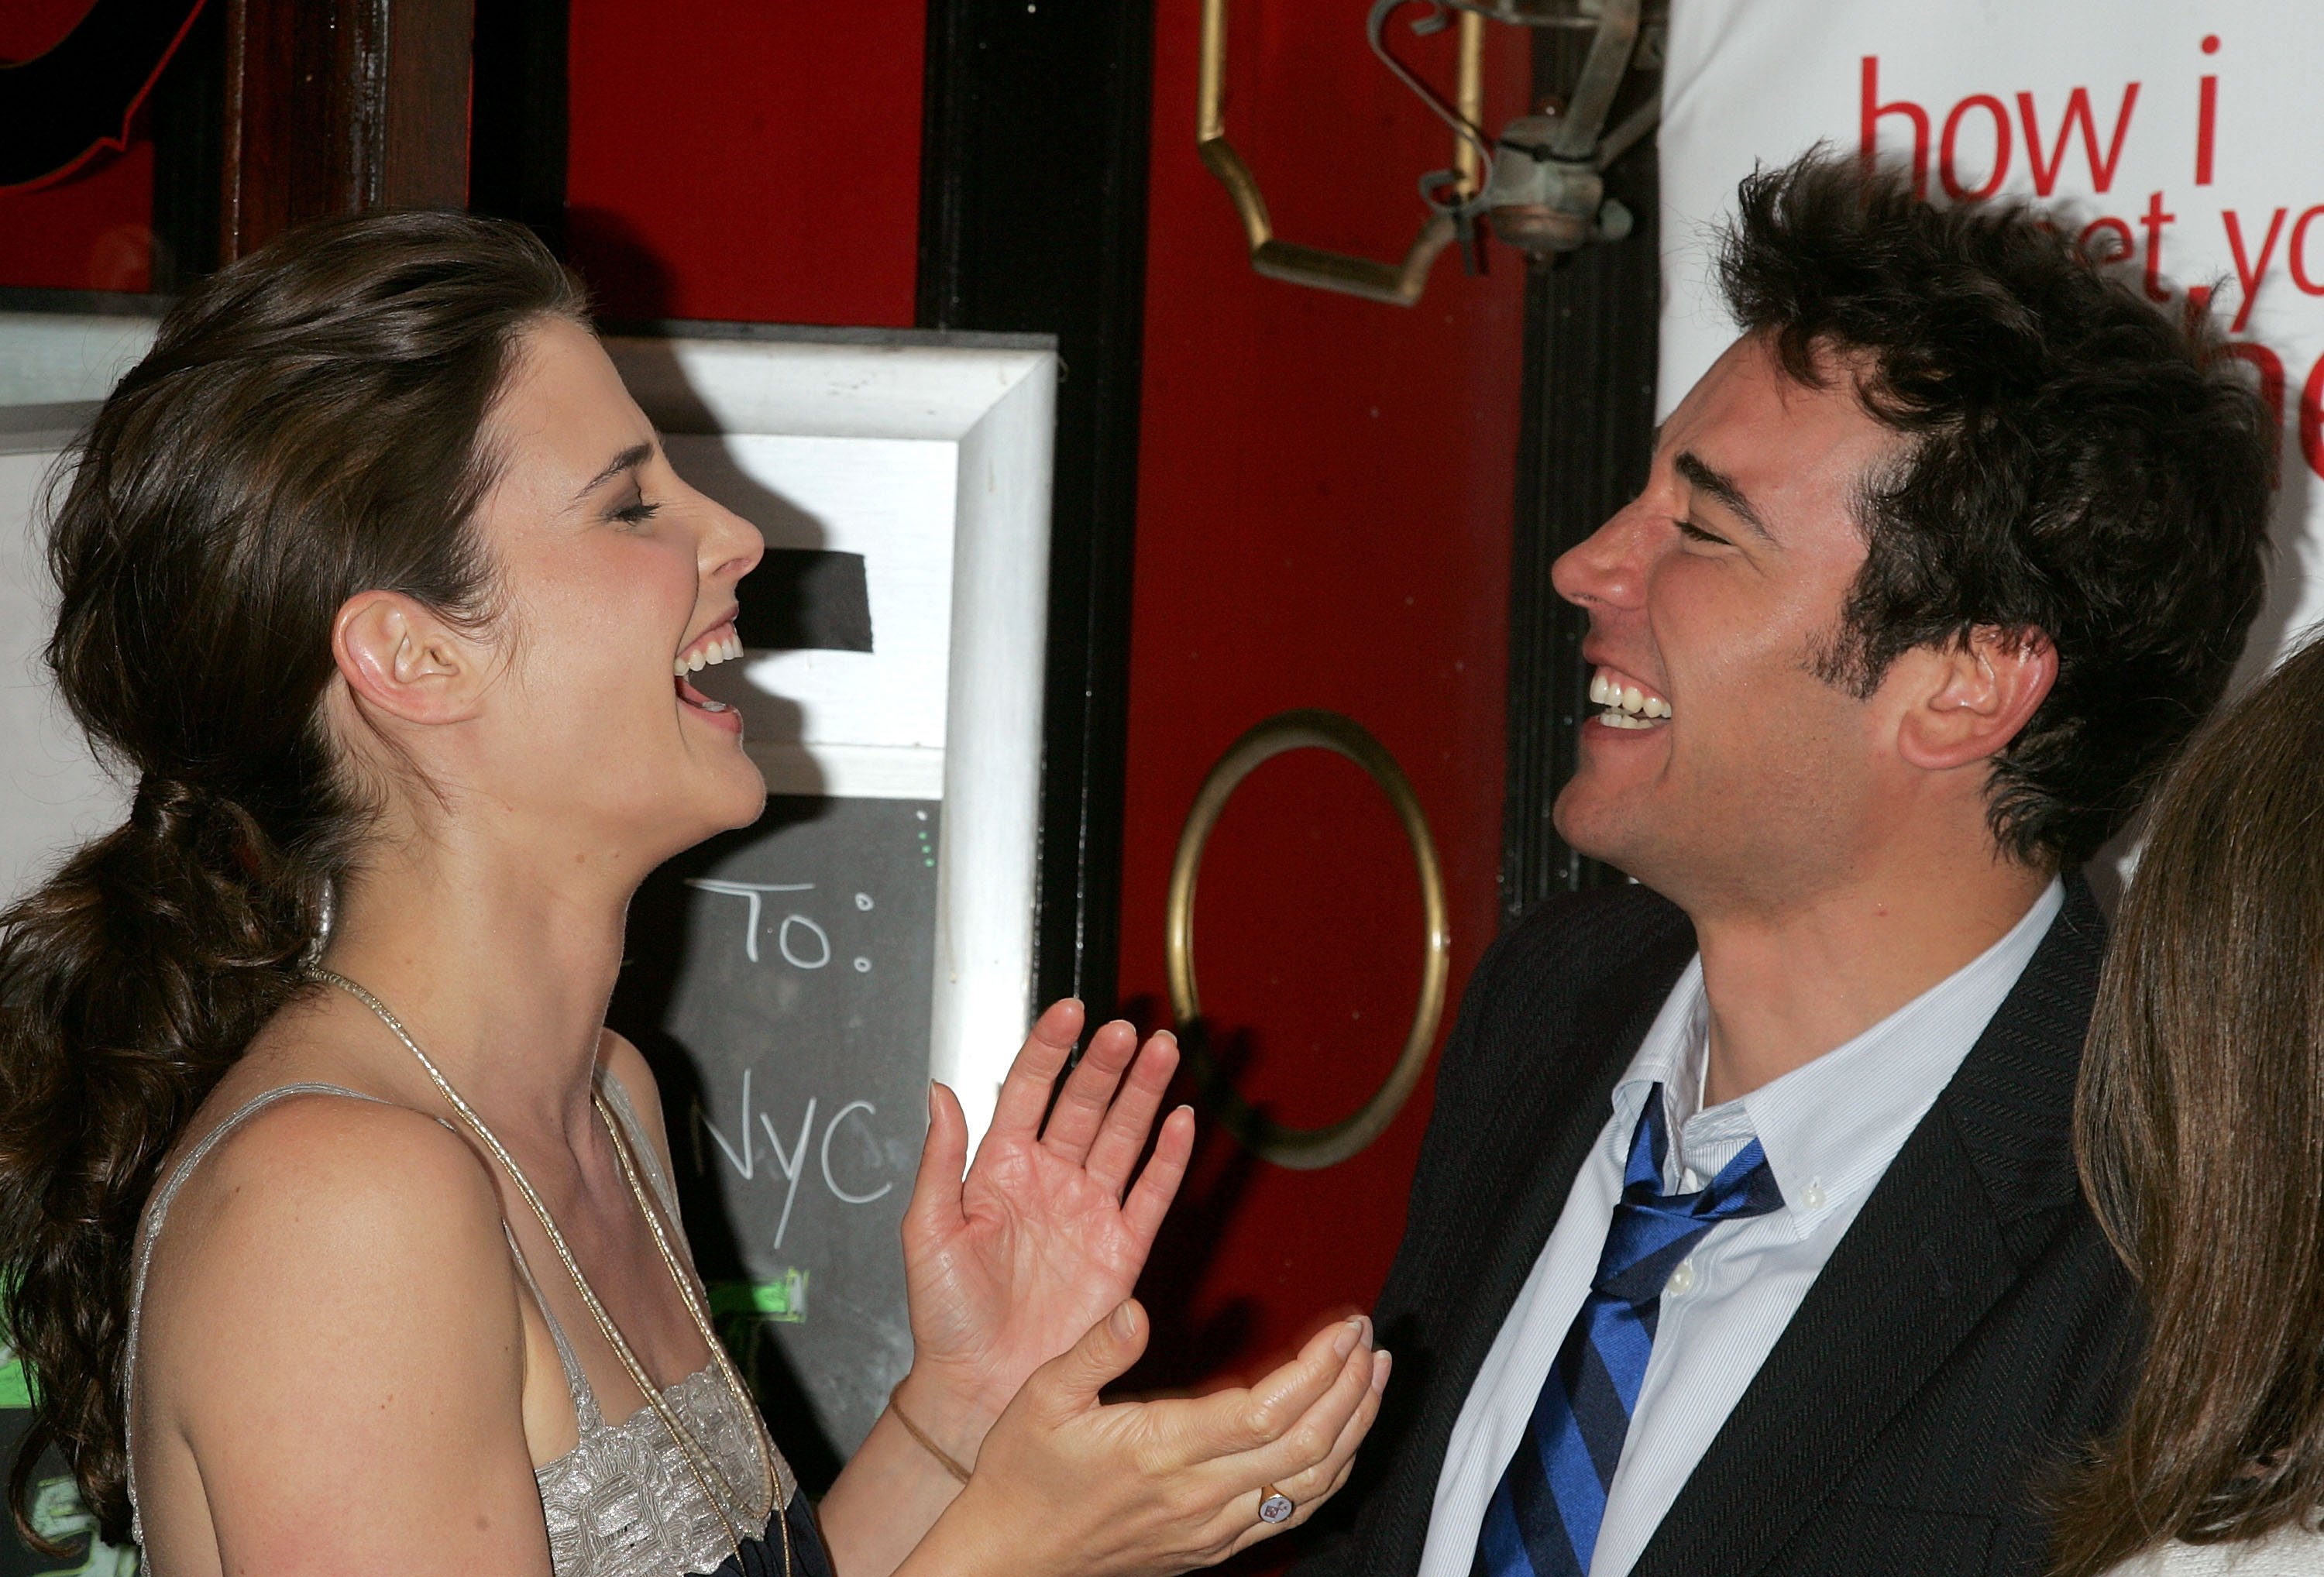 Josh Radnor and Cobie Smulders laughing.